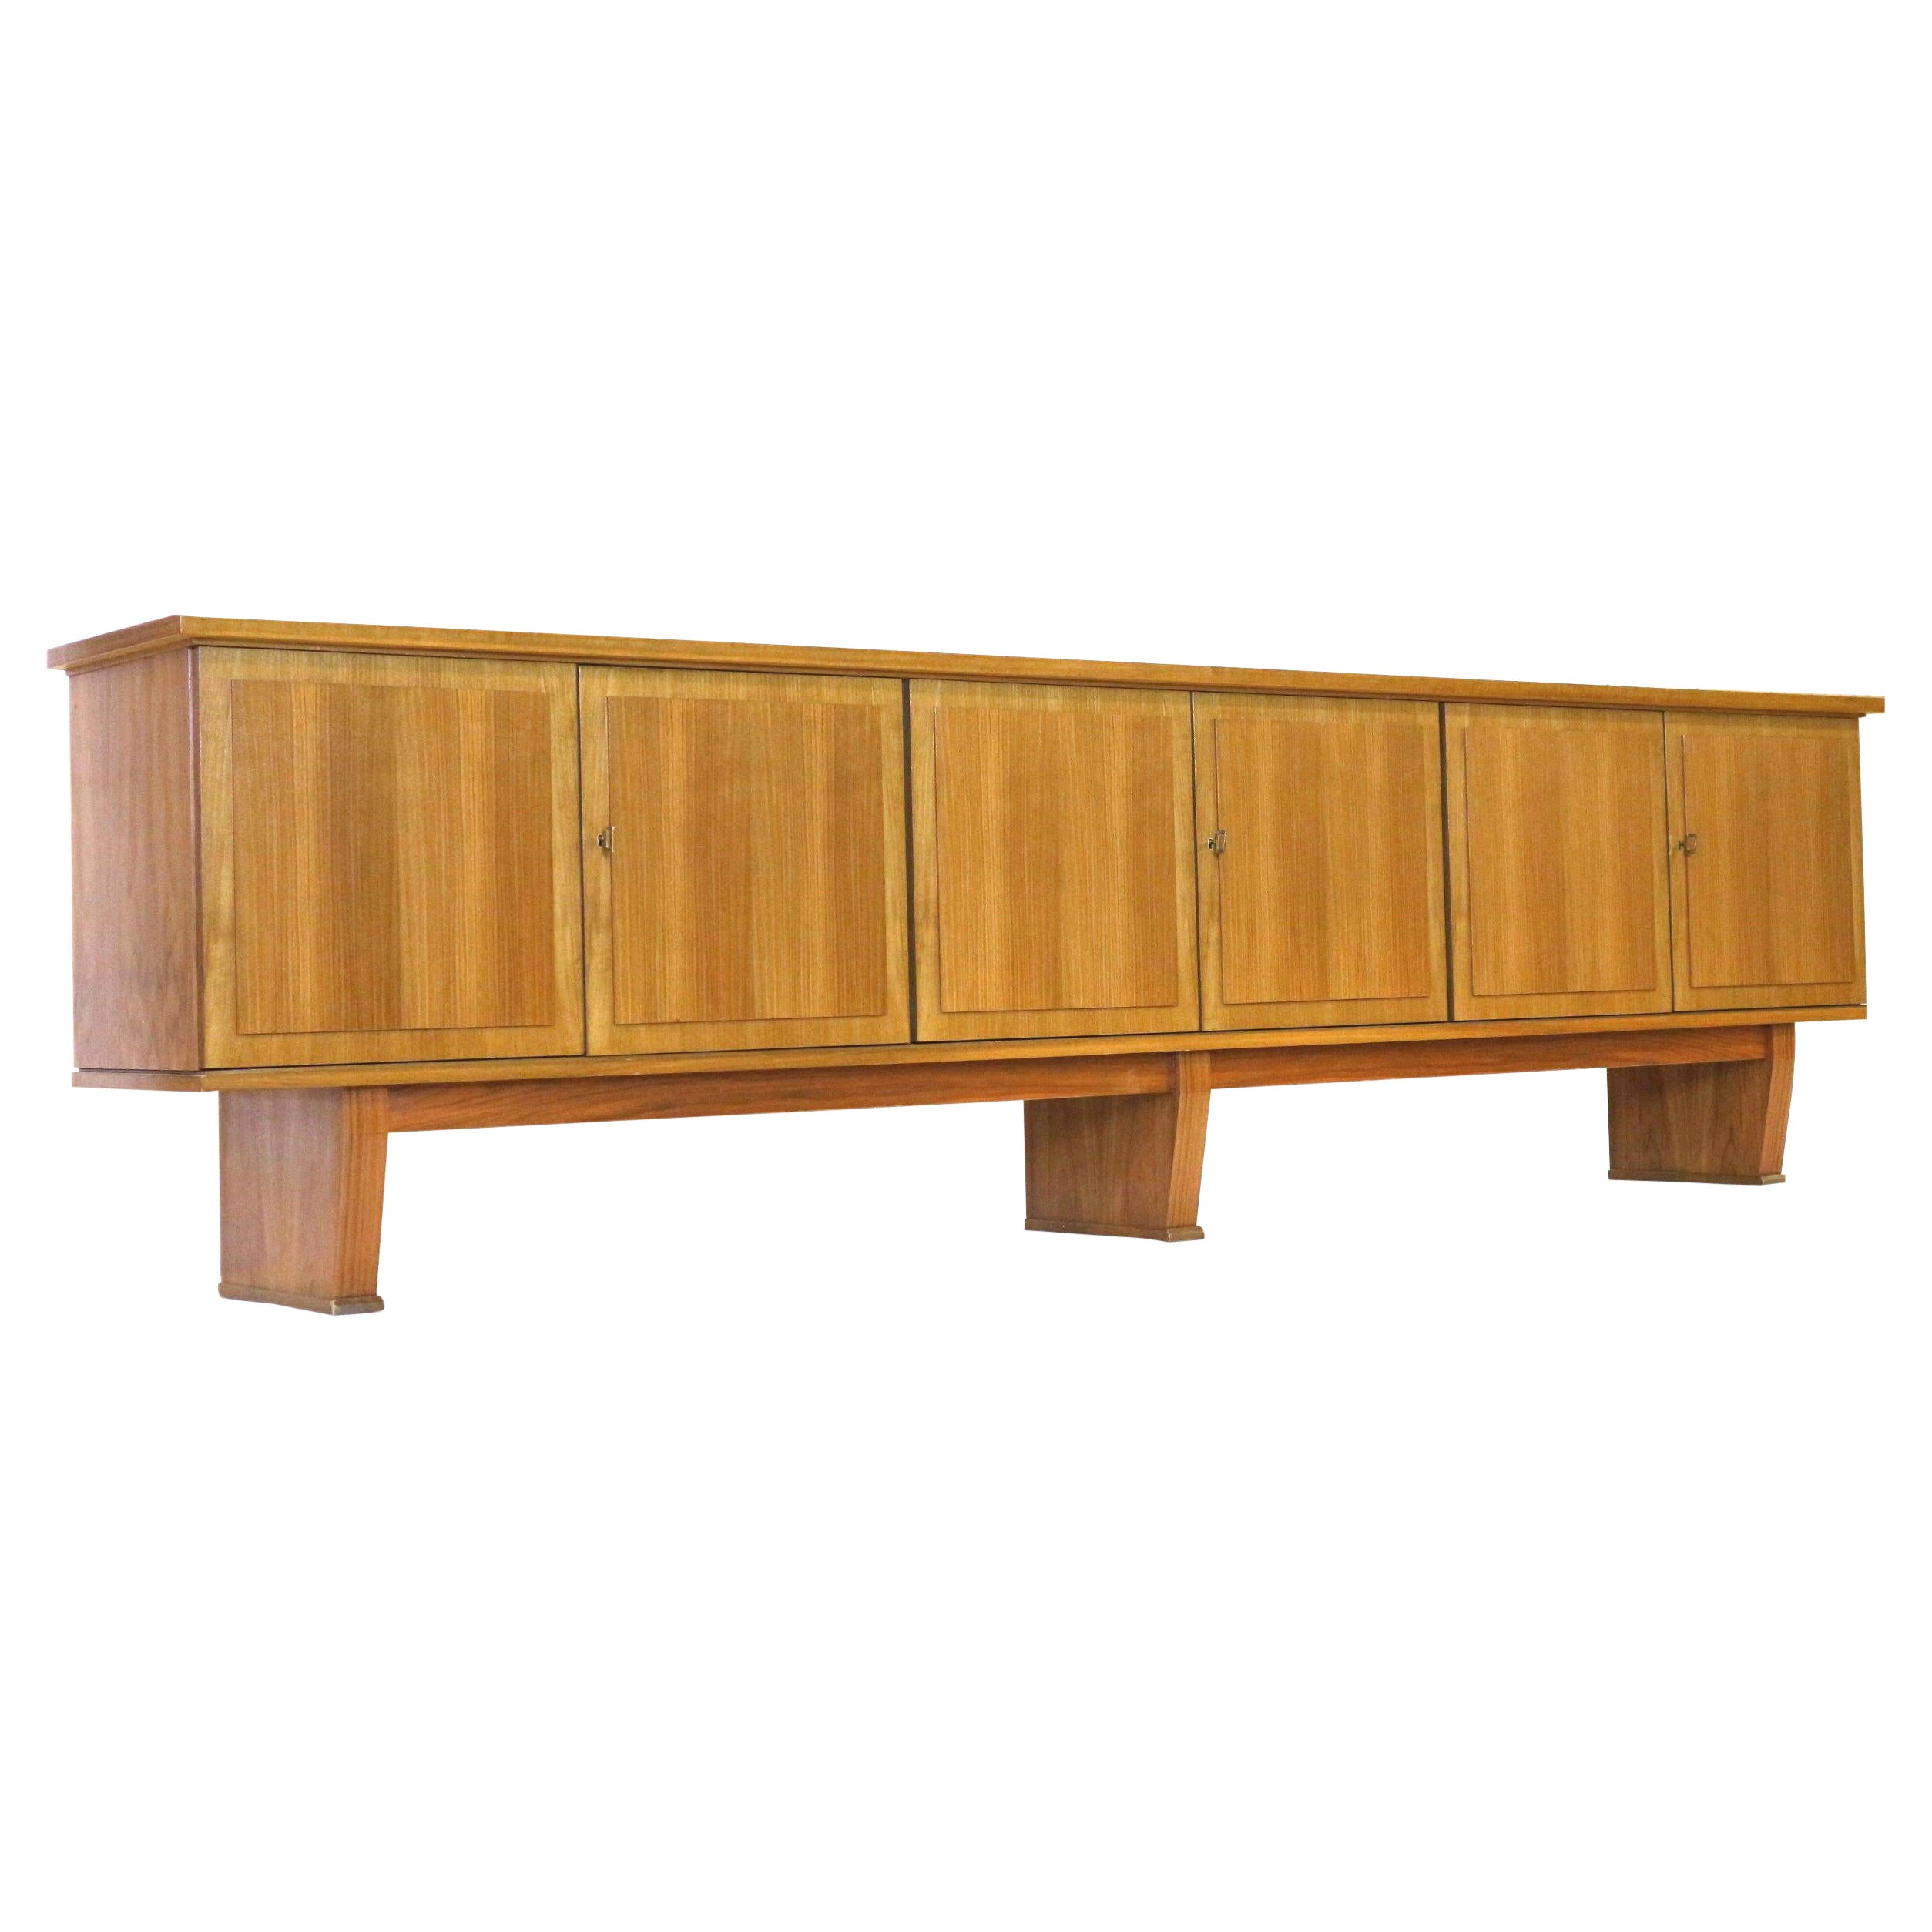 Rare Large Vintage Sideboard Made in the 1950s